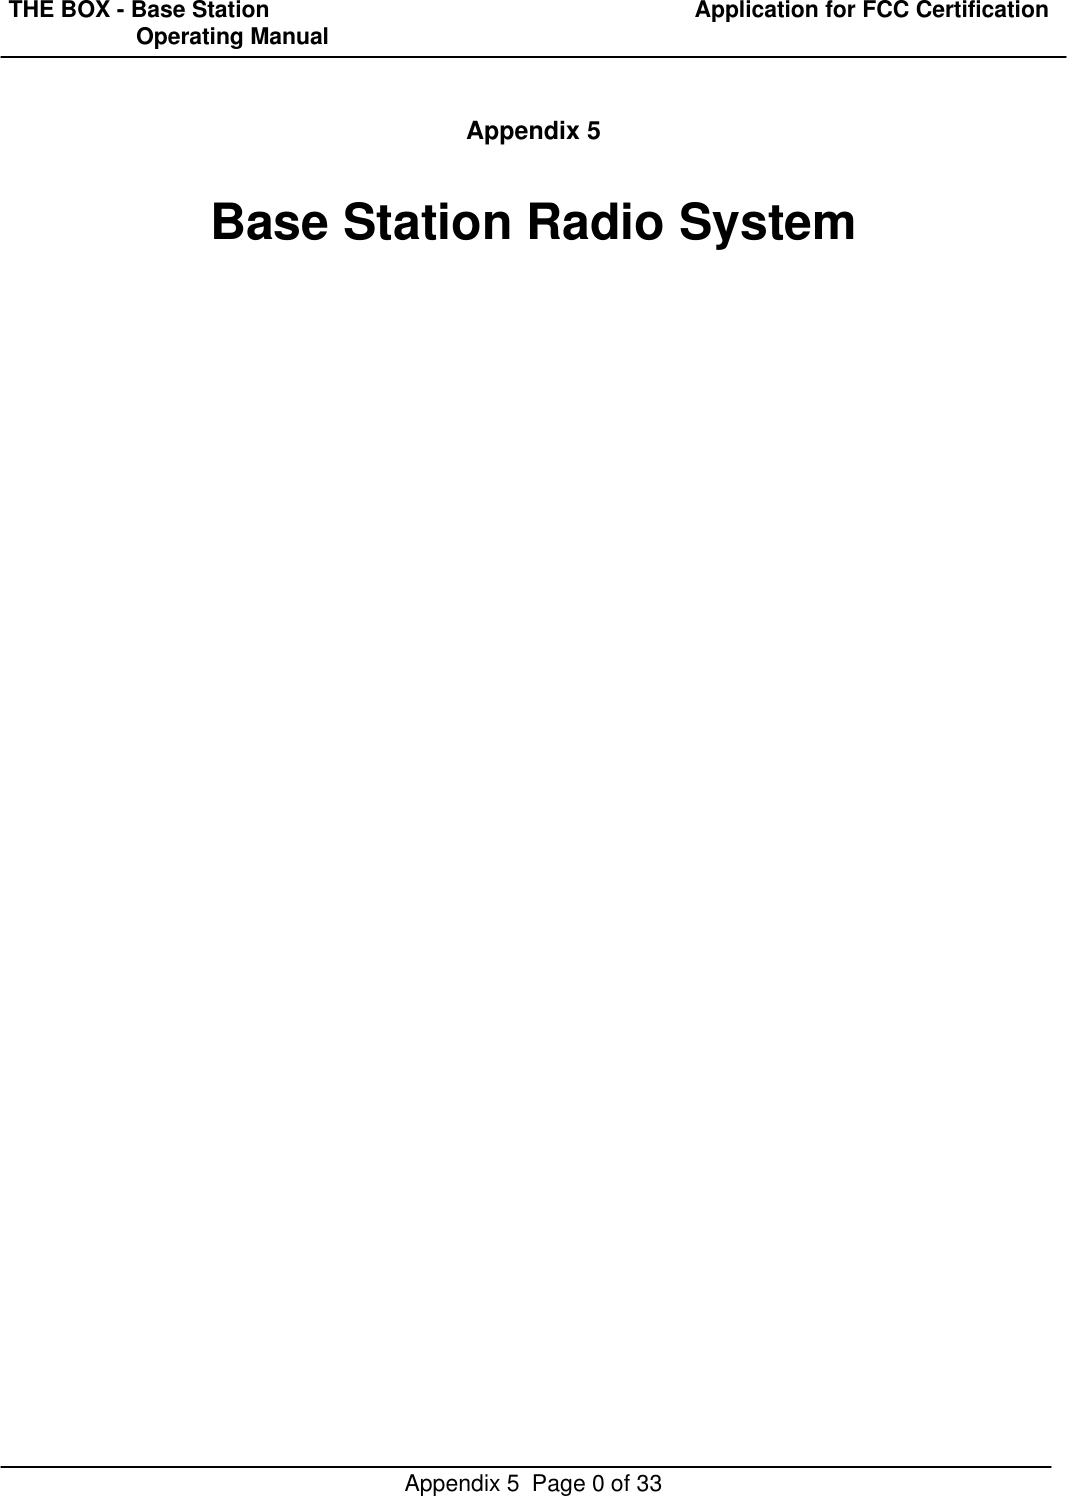 THE BOX - Base Station  Application for FCC Certification                    Operating ManualAppendix 5  Page 0 of 33Appendix 5Base Station Radio System